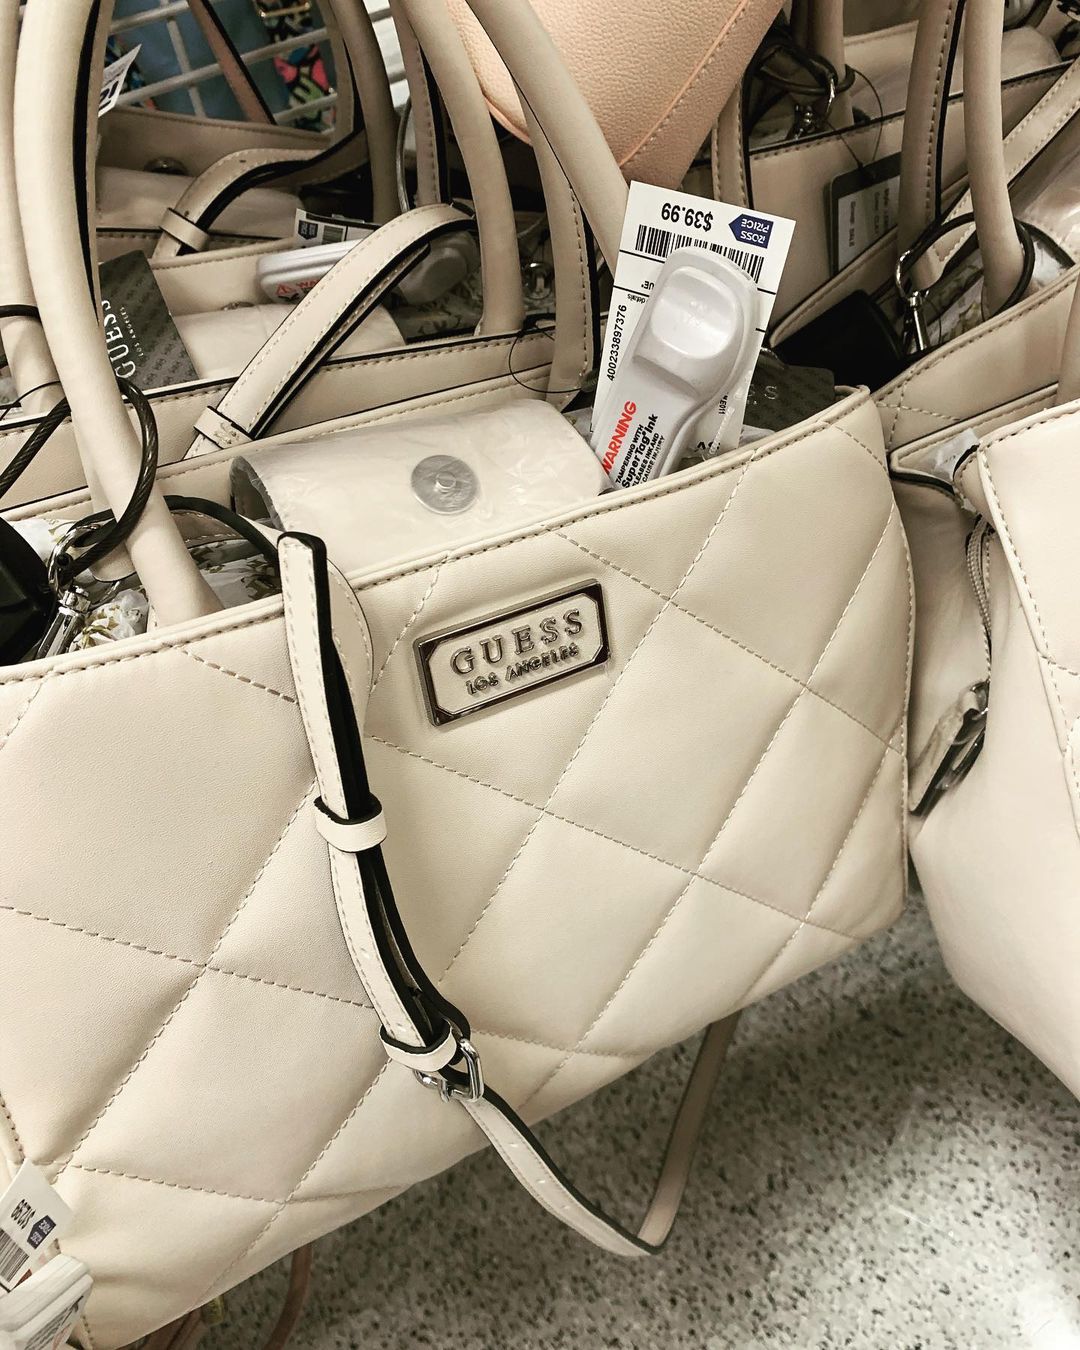 Bags at Ross Orlando - Ross Dress for Less